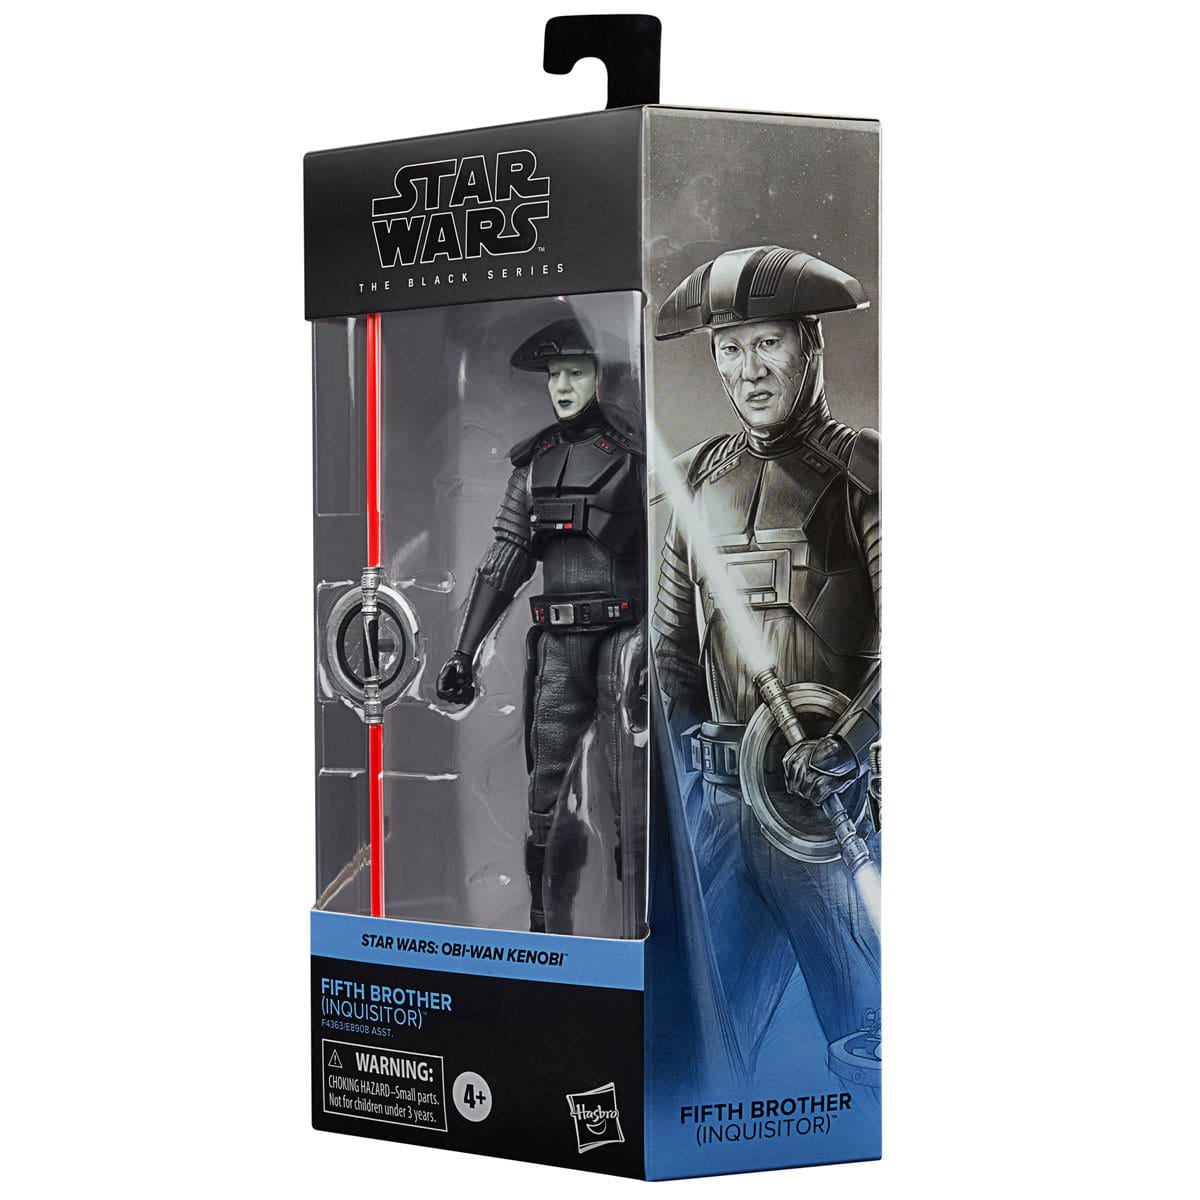 Star Wars The Black Series Fifth Brother (Inquisitor) 6-Inch Action Figure - Pop-O-Loco - Hasbro